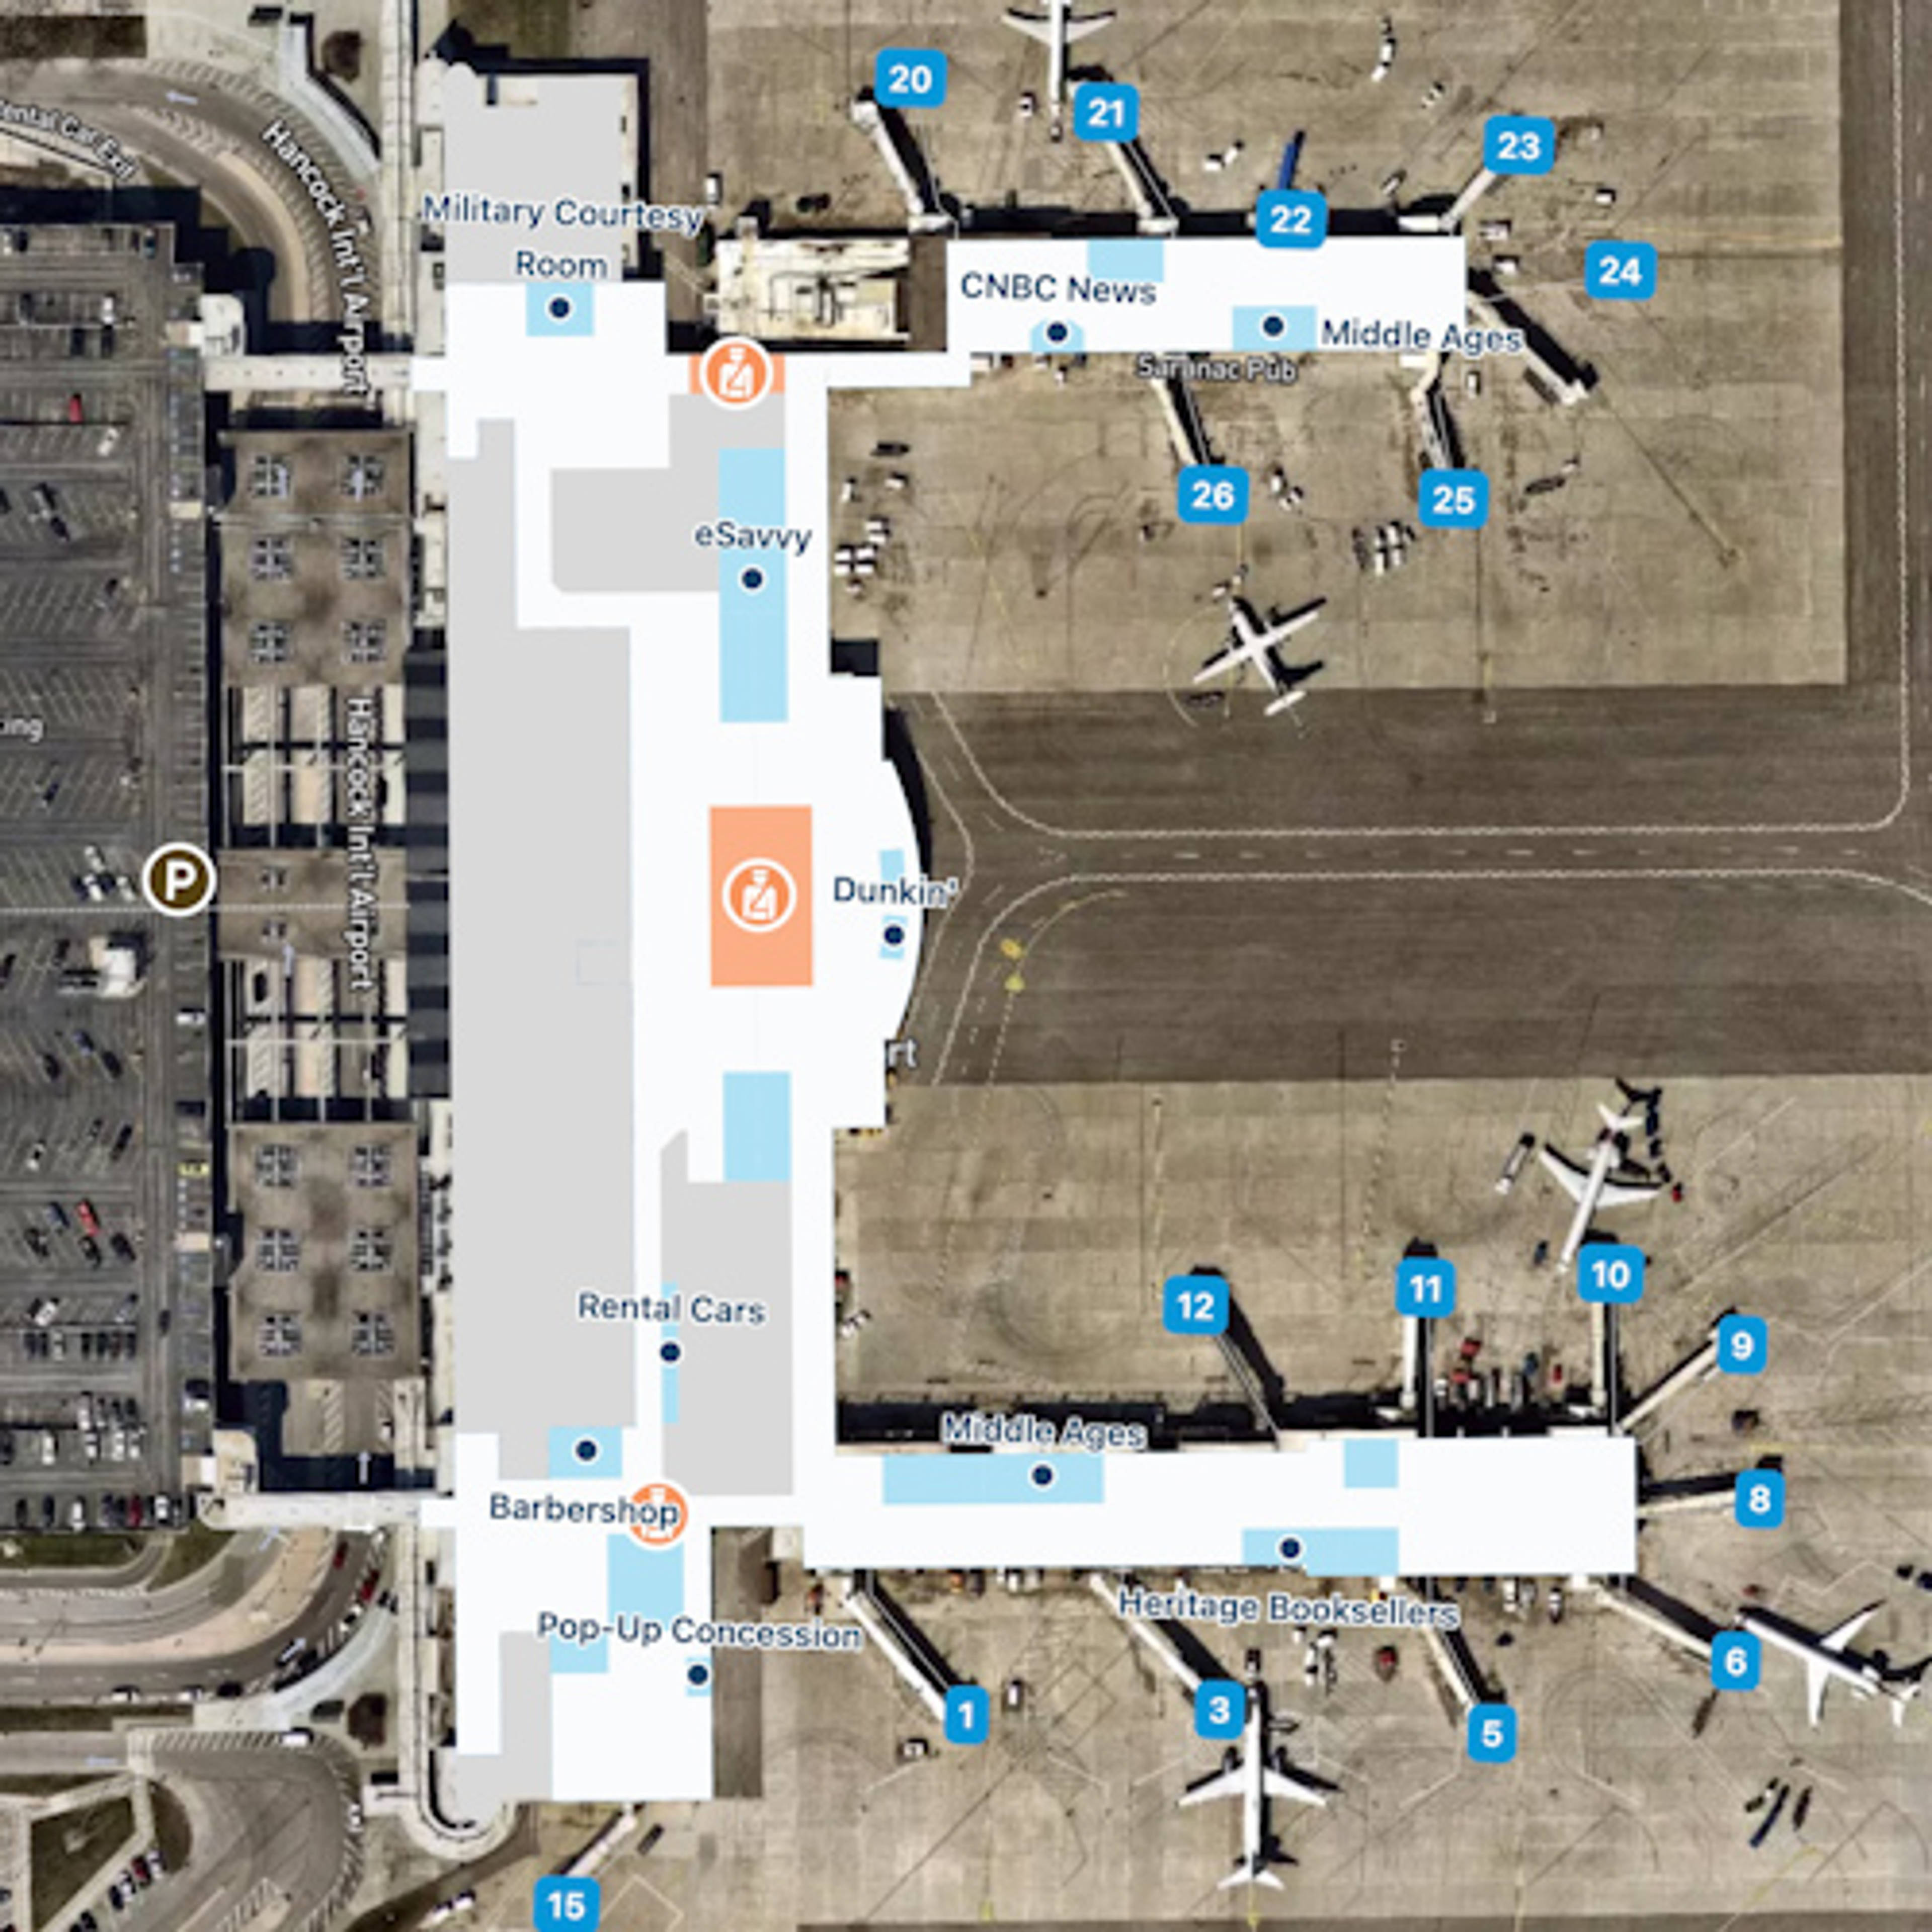 Syracuse Airport Map: Guide to SYR's Terminals